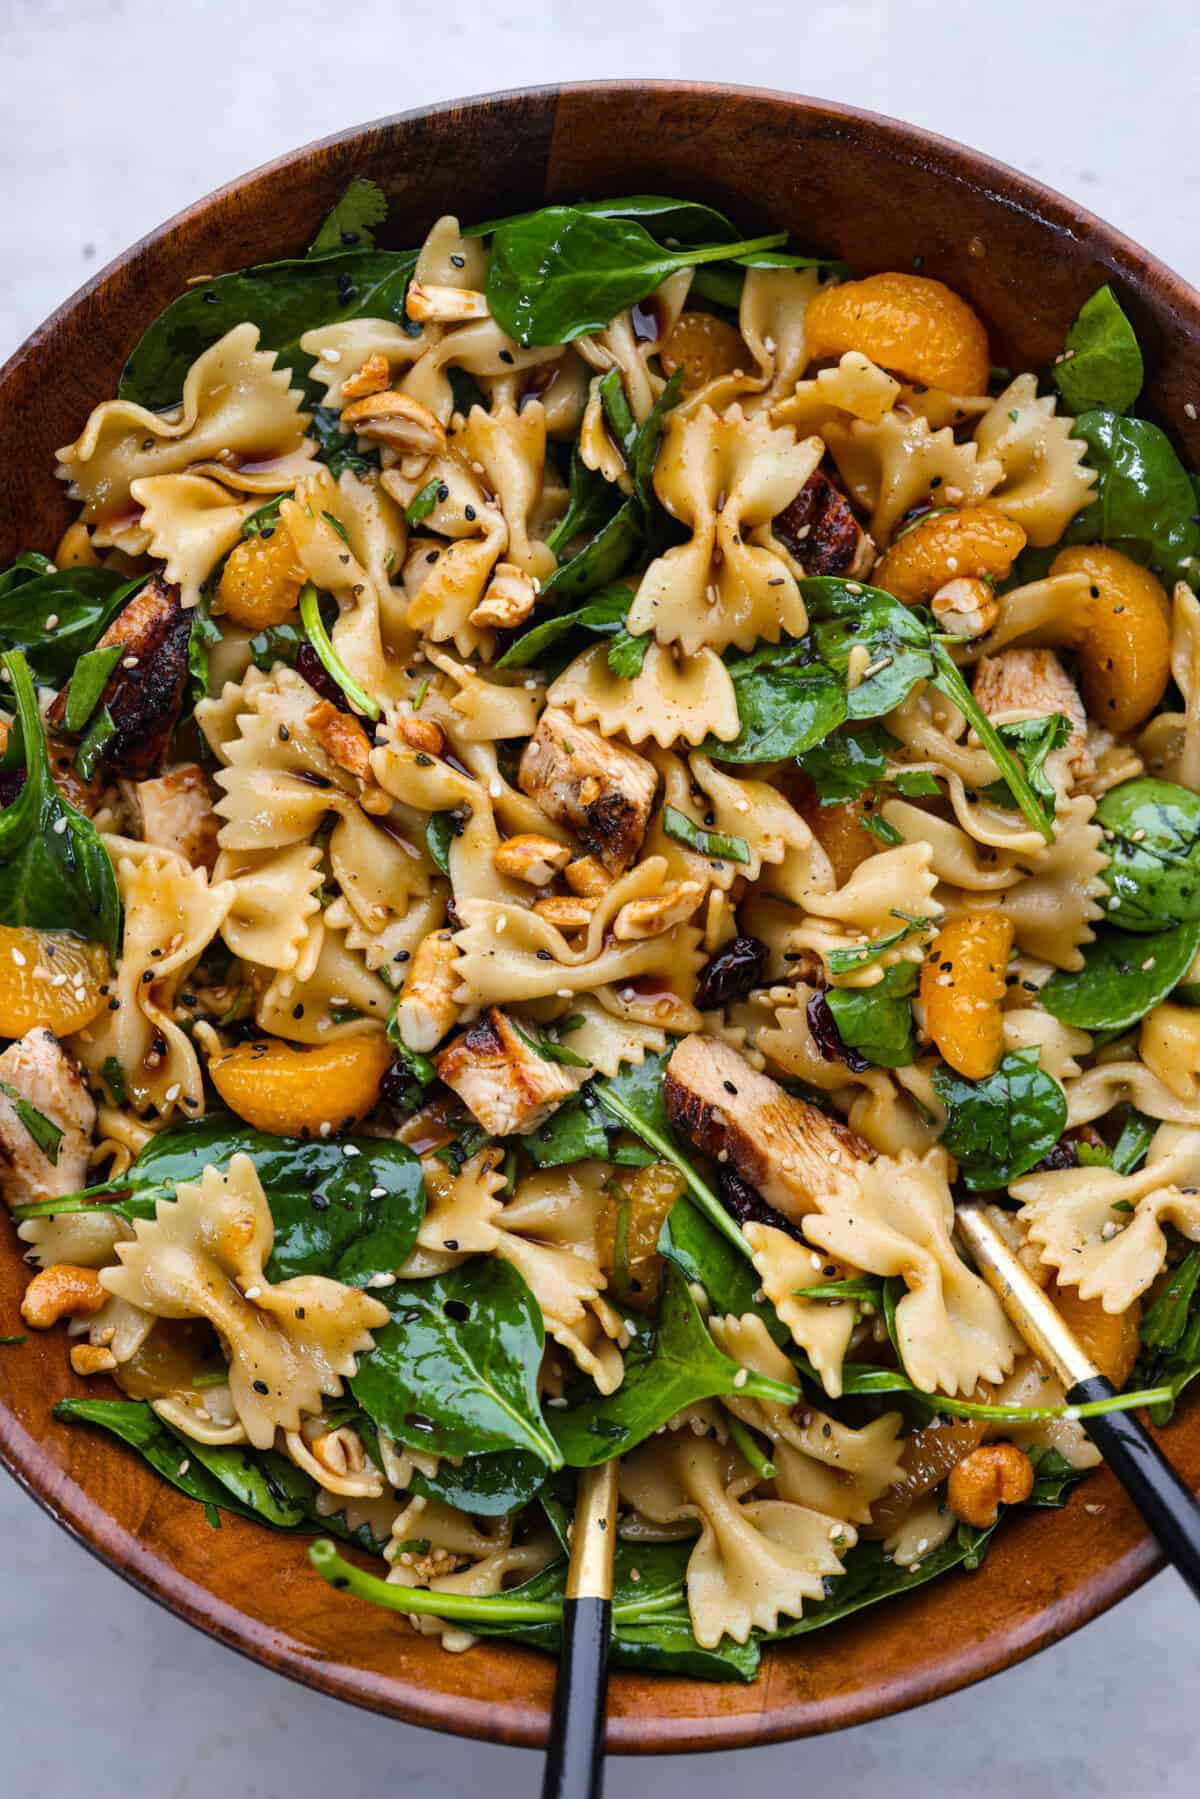 Teriyaki spinach pasta salad served in a large wooden serving bowl.